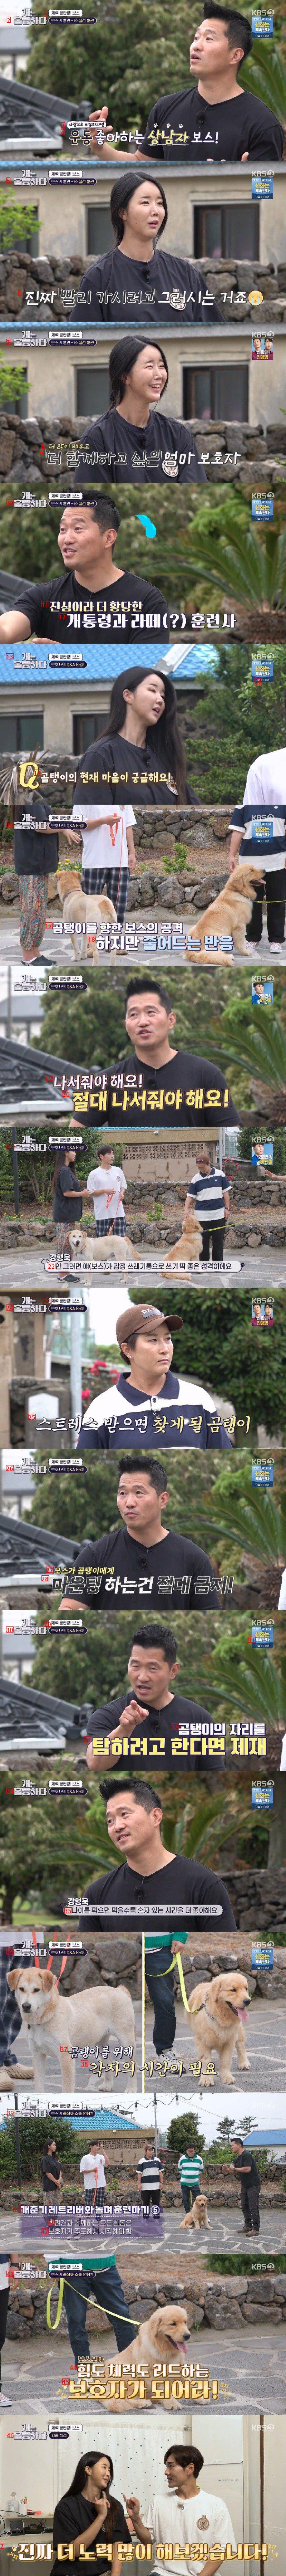 Kang Hyungwook, a retriever who studied a lot but couldn't handle it